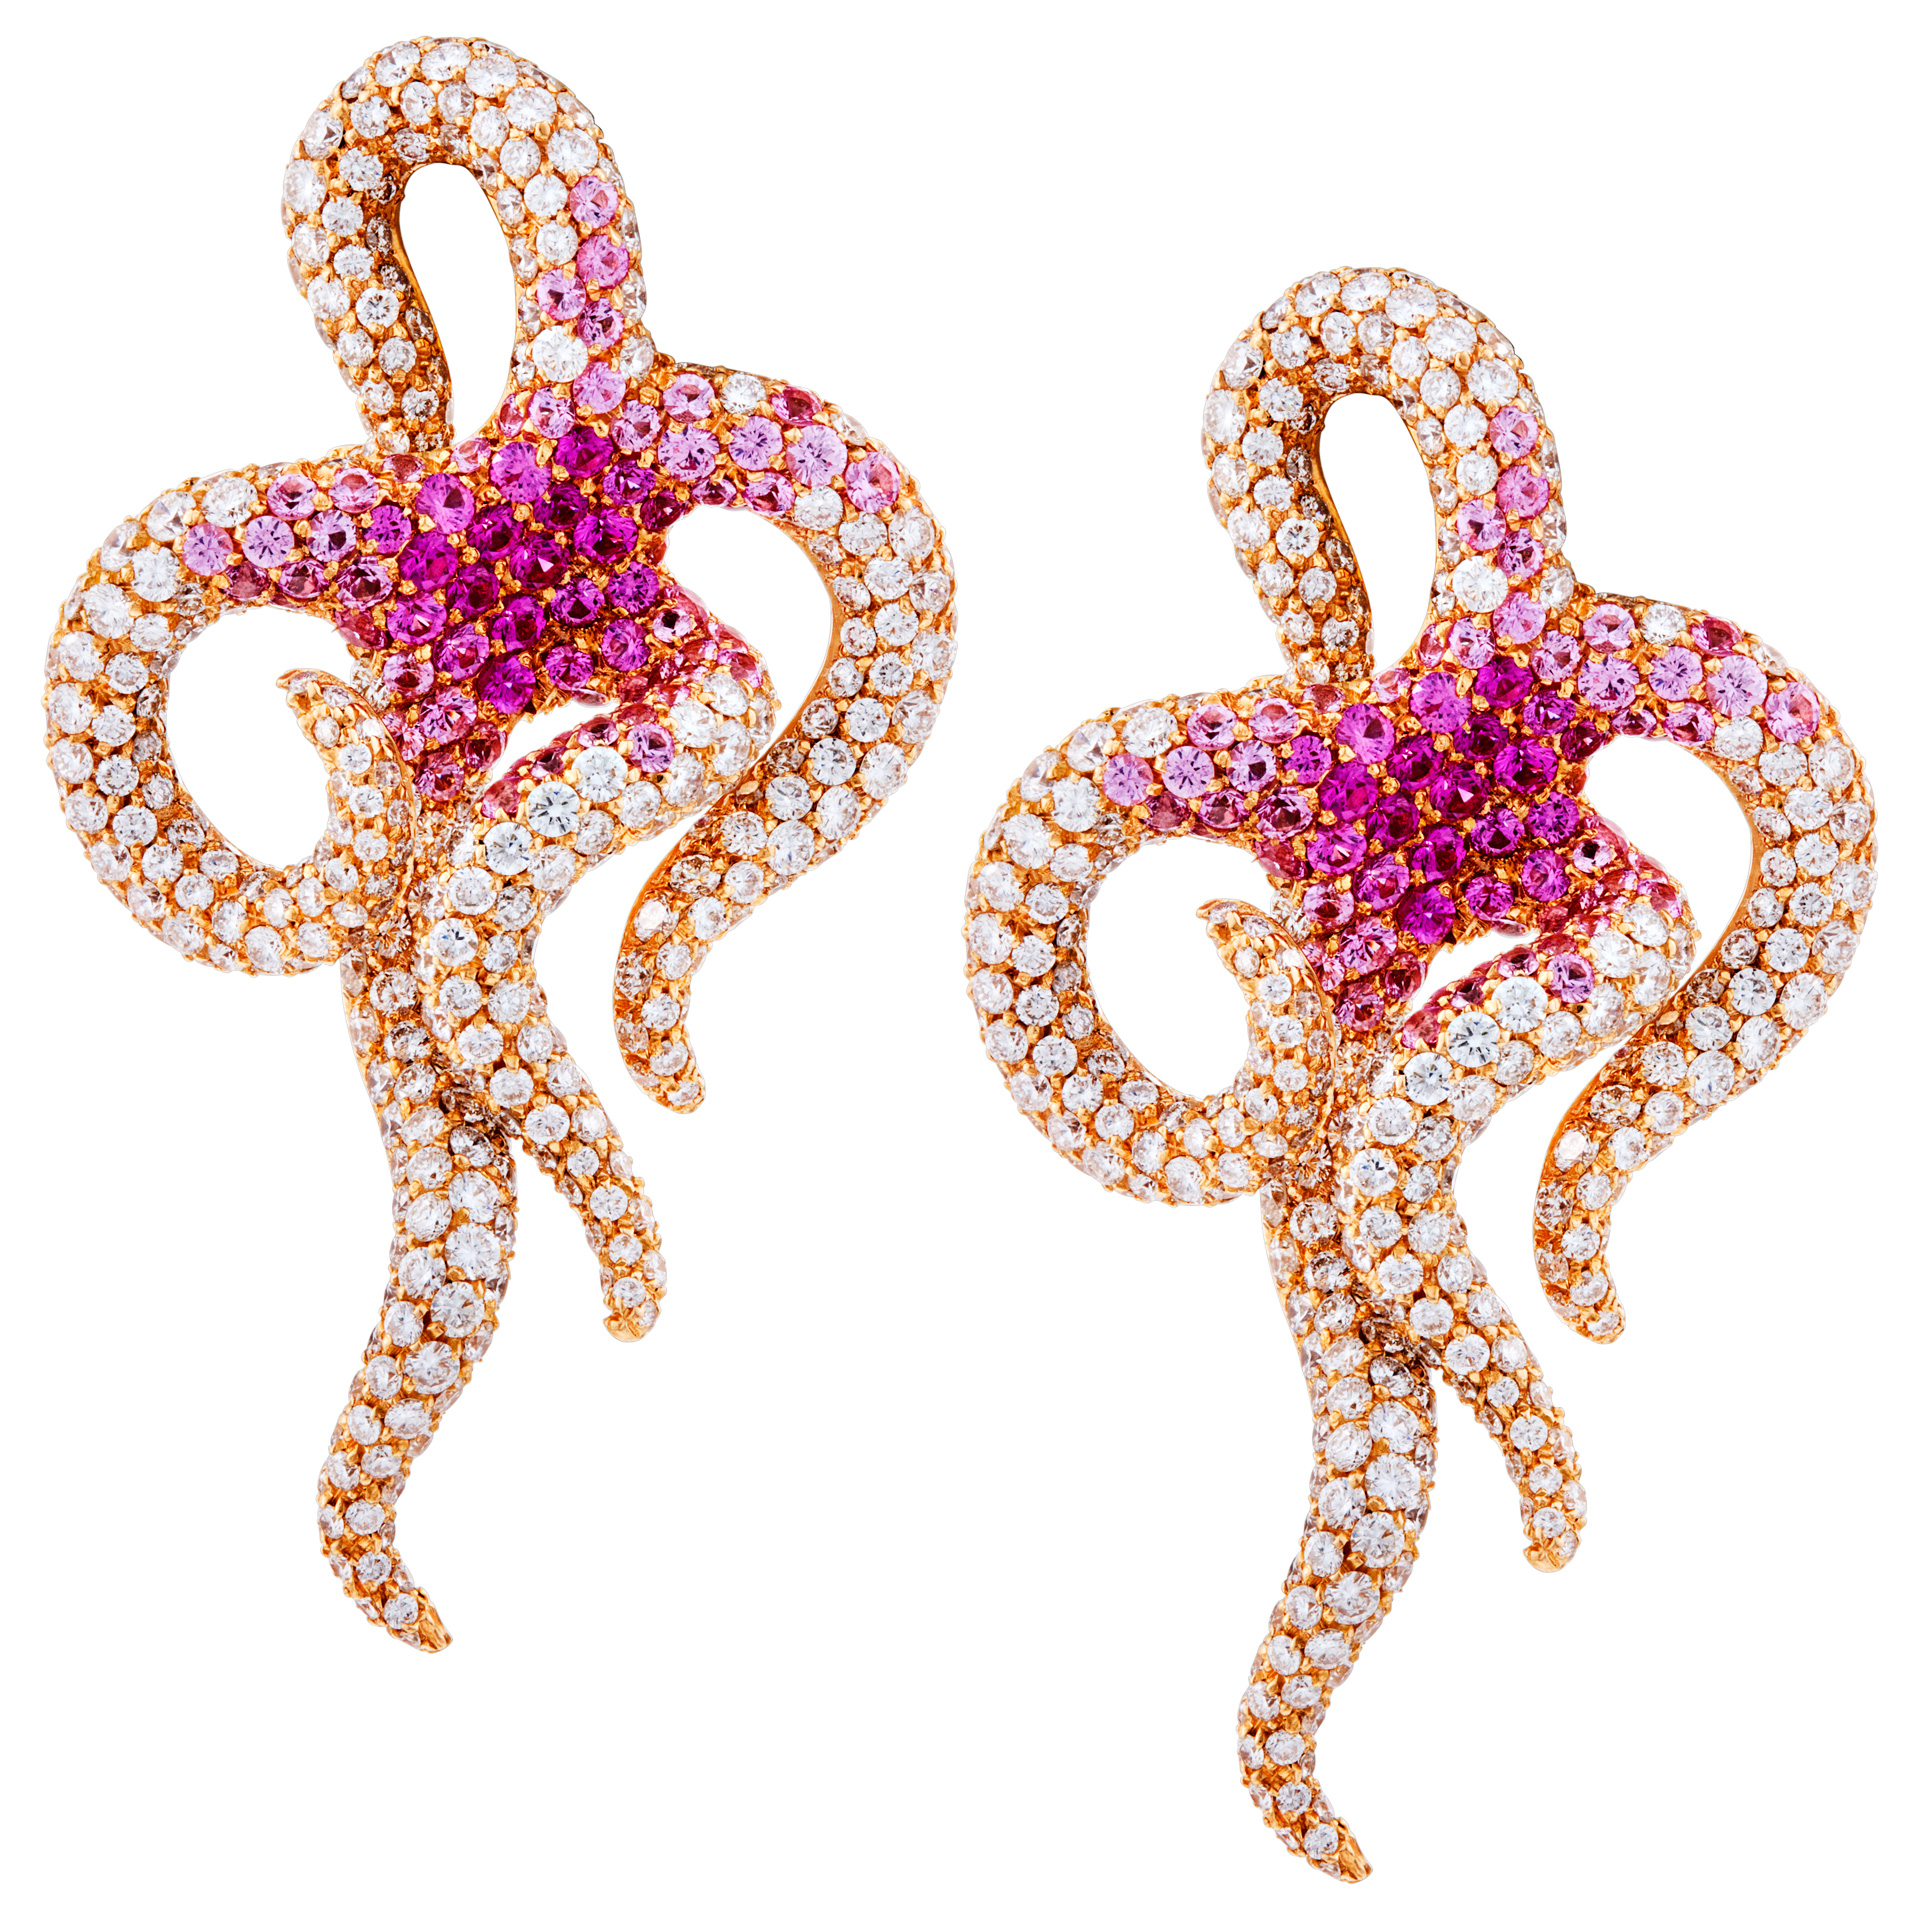 18k rose gold tentacle pave diamond designer earrings with pink sapphires image 1